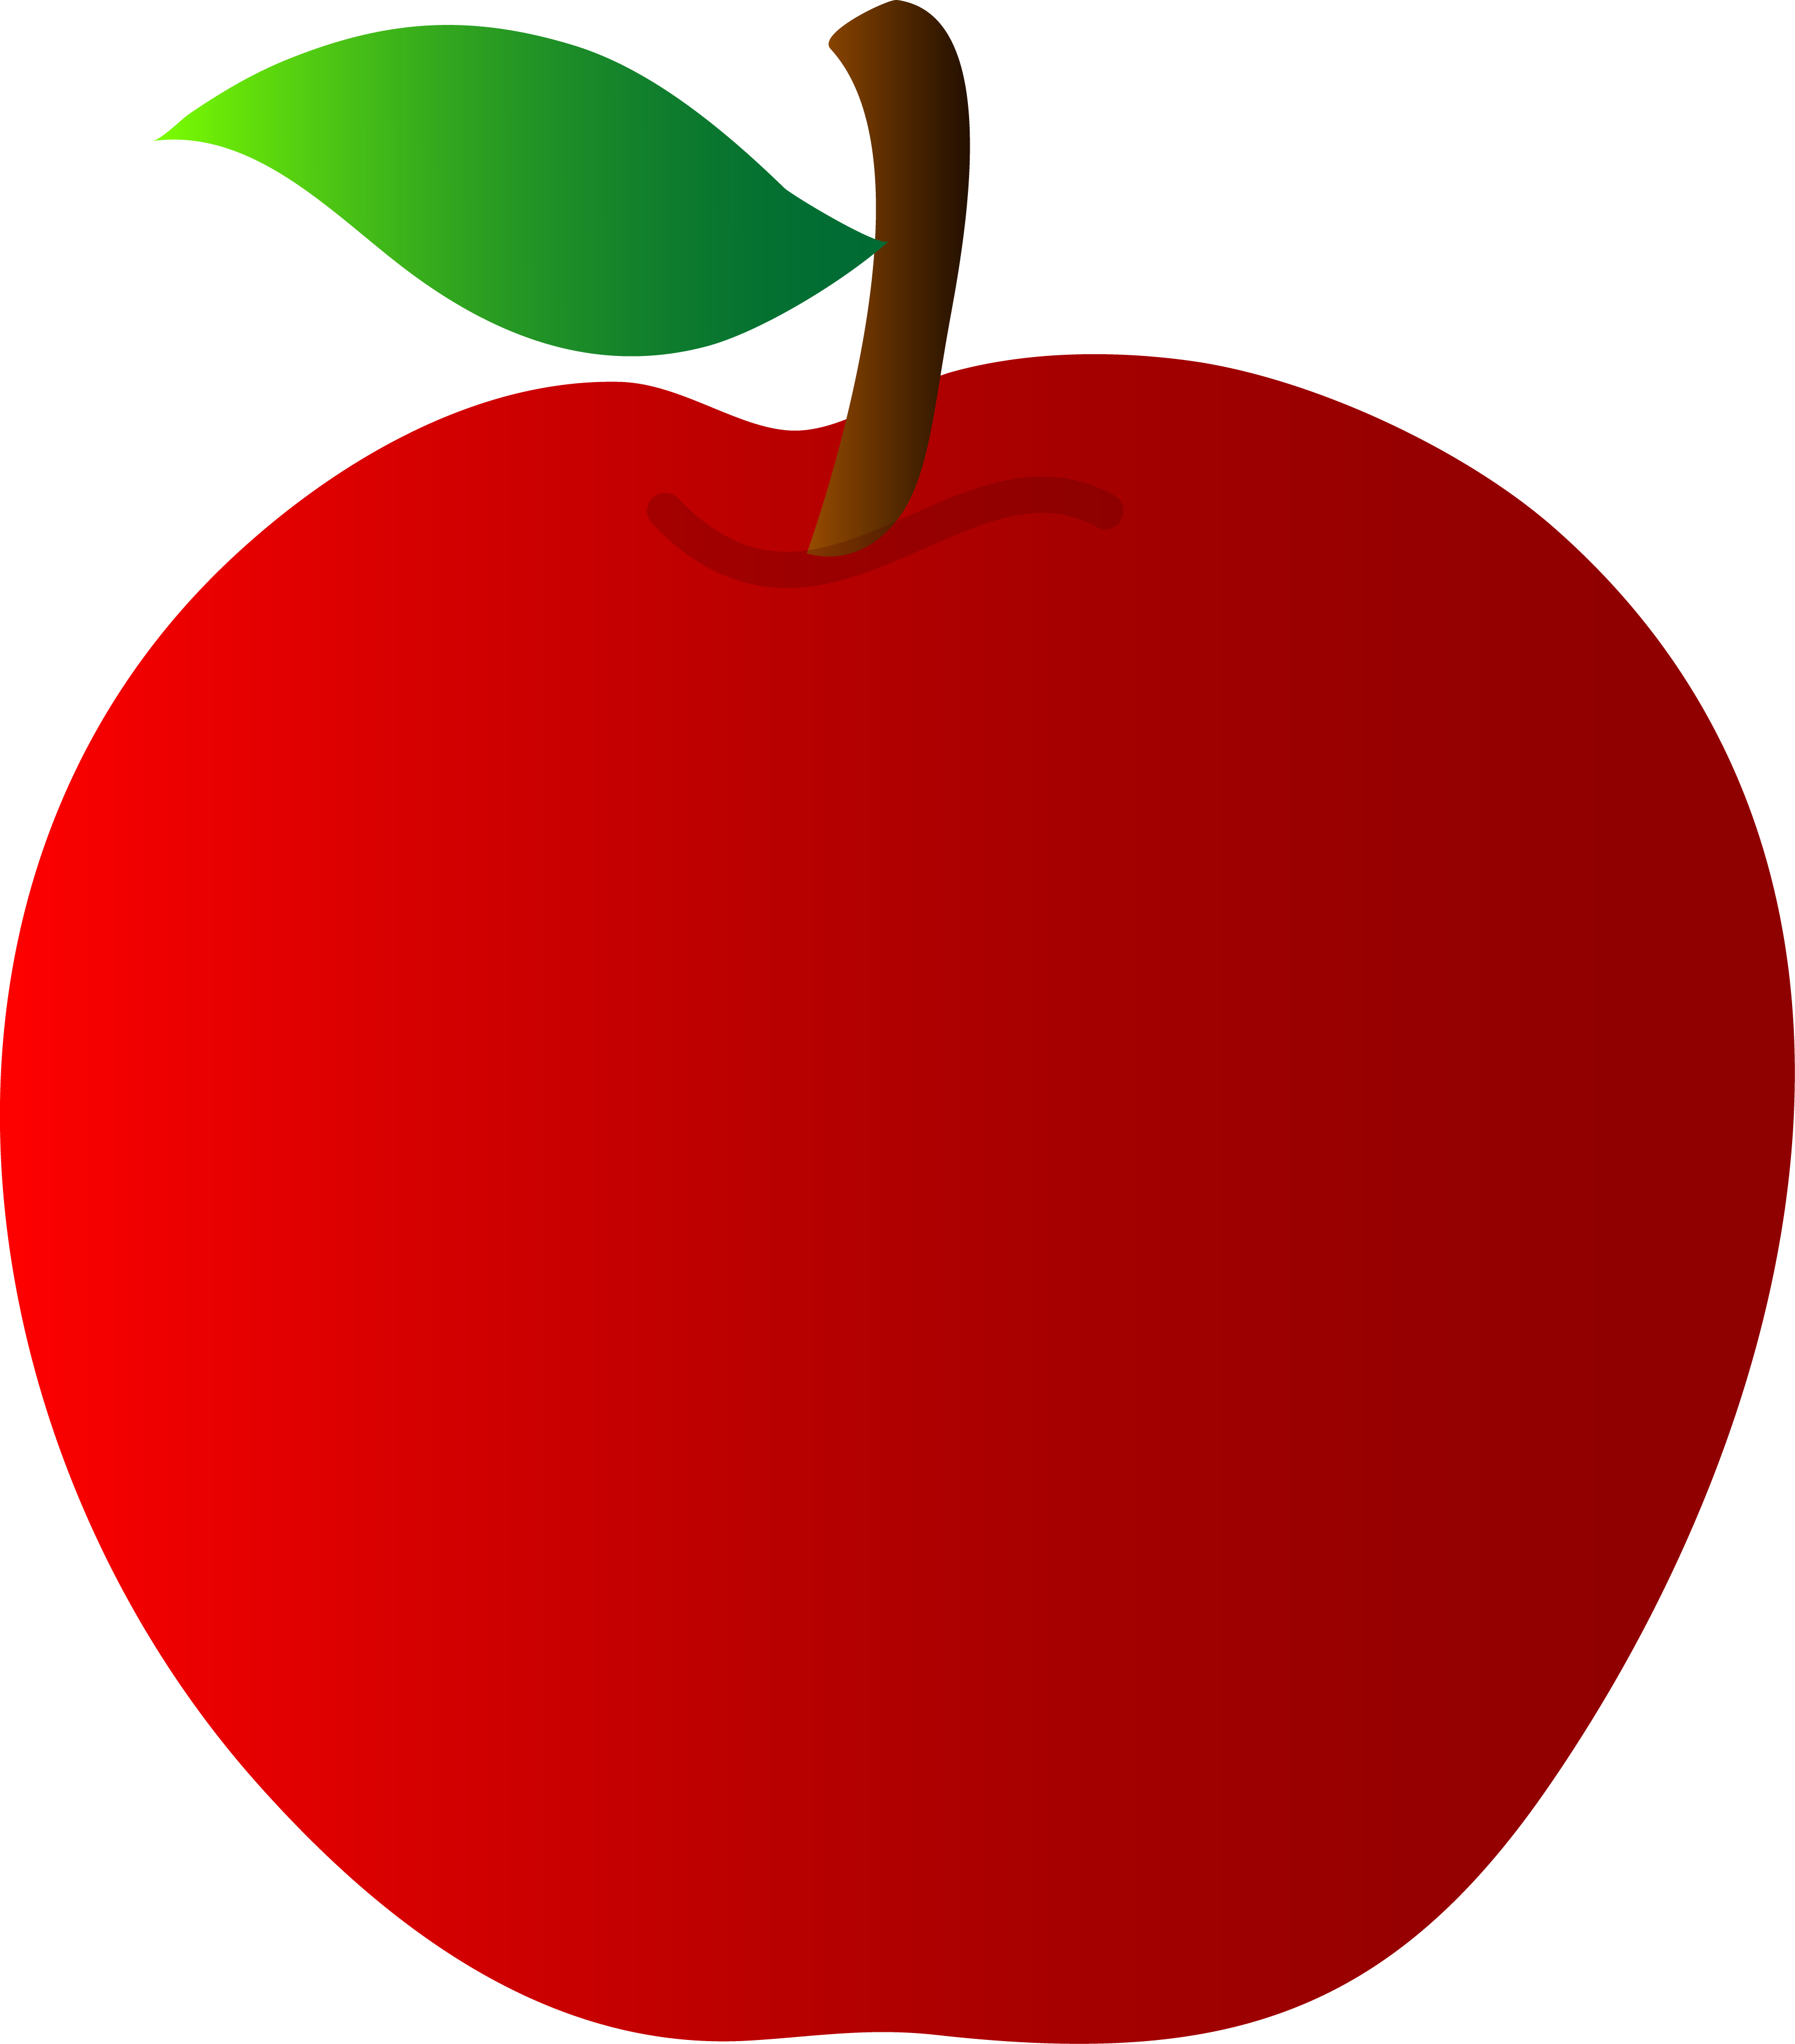 Picture Of Apples - Clipart library